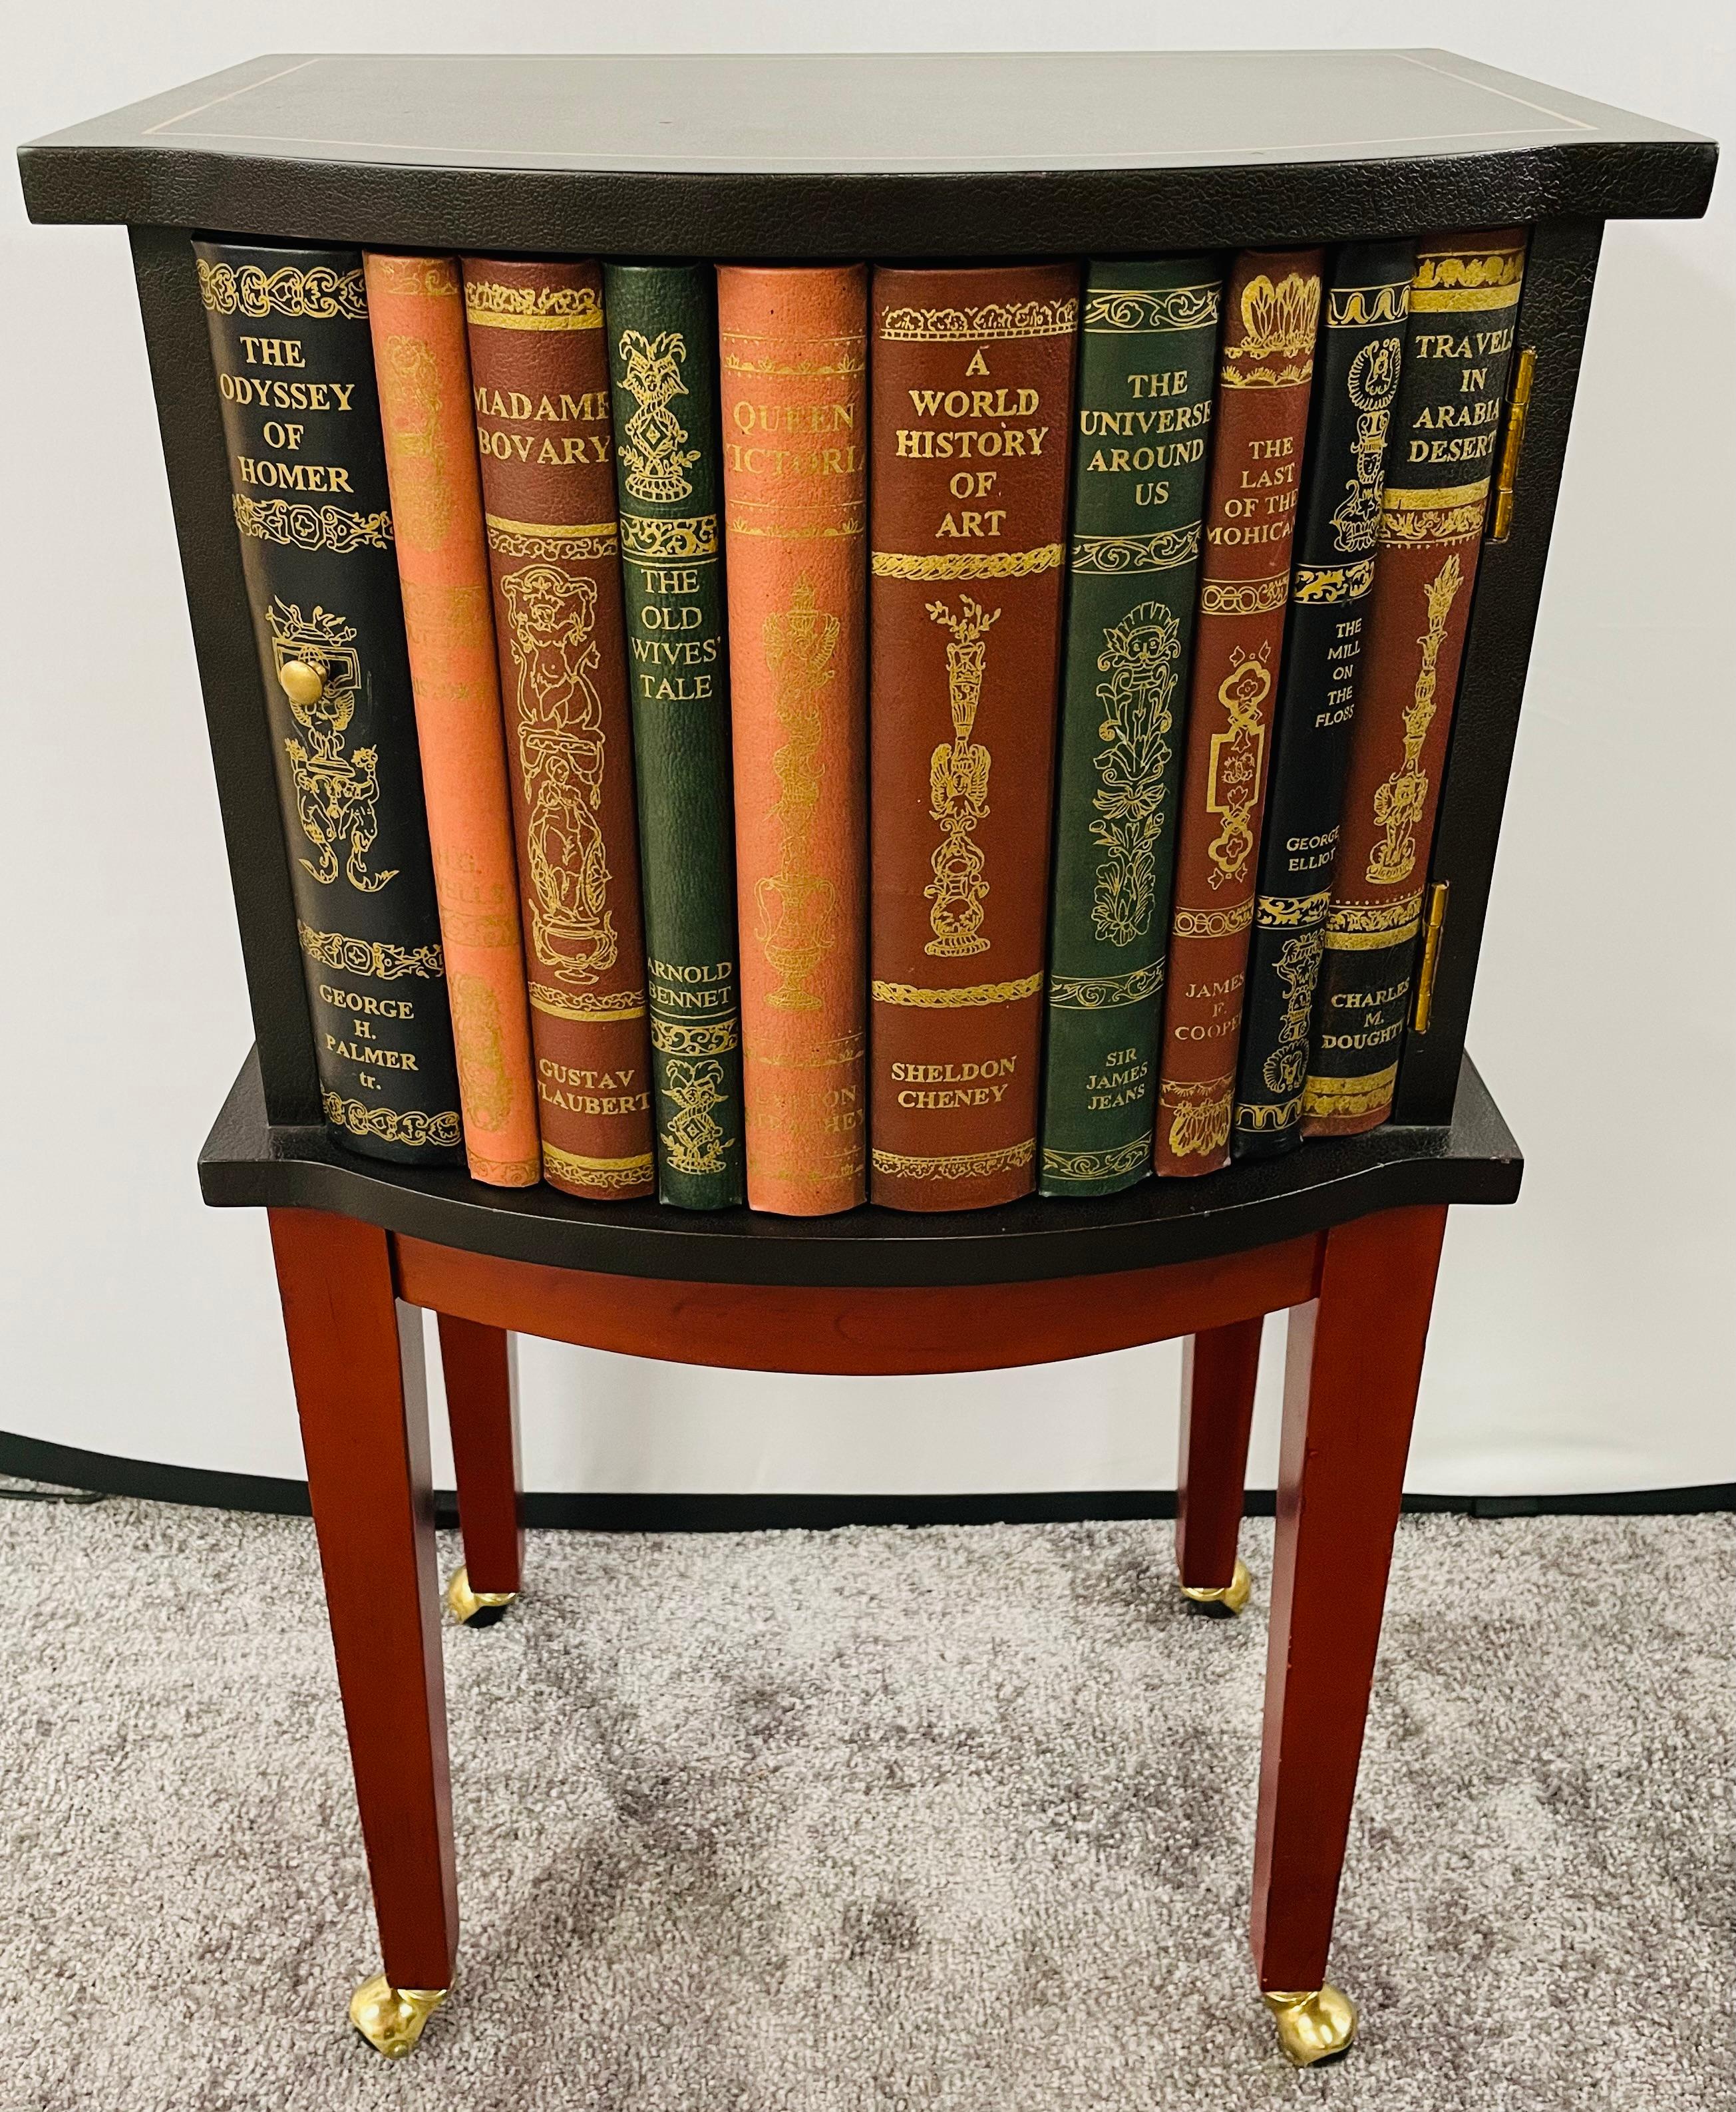 A lovely Regency style night stand or end table featuring a black tooled leather top decorated with a gold line and one door cabinet. The cabinet door is hand painted to display a splendid design of rare and collectible books. The table is raised on